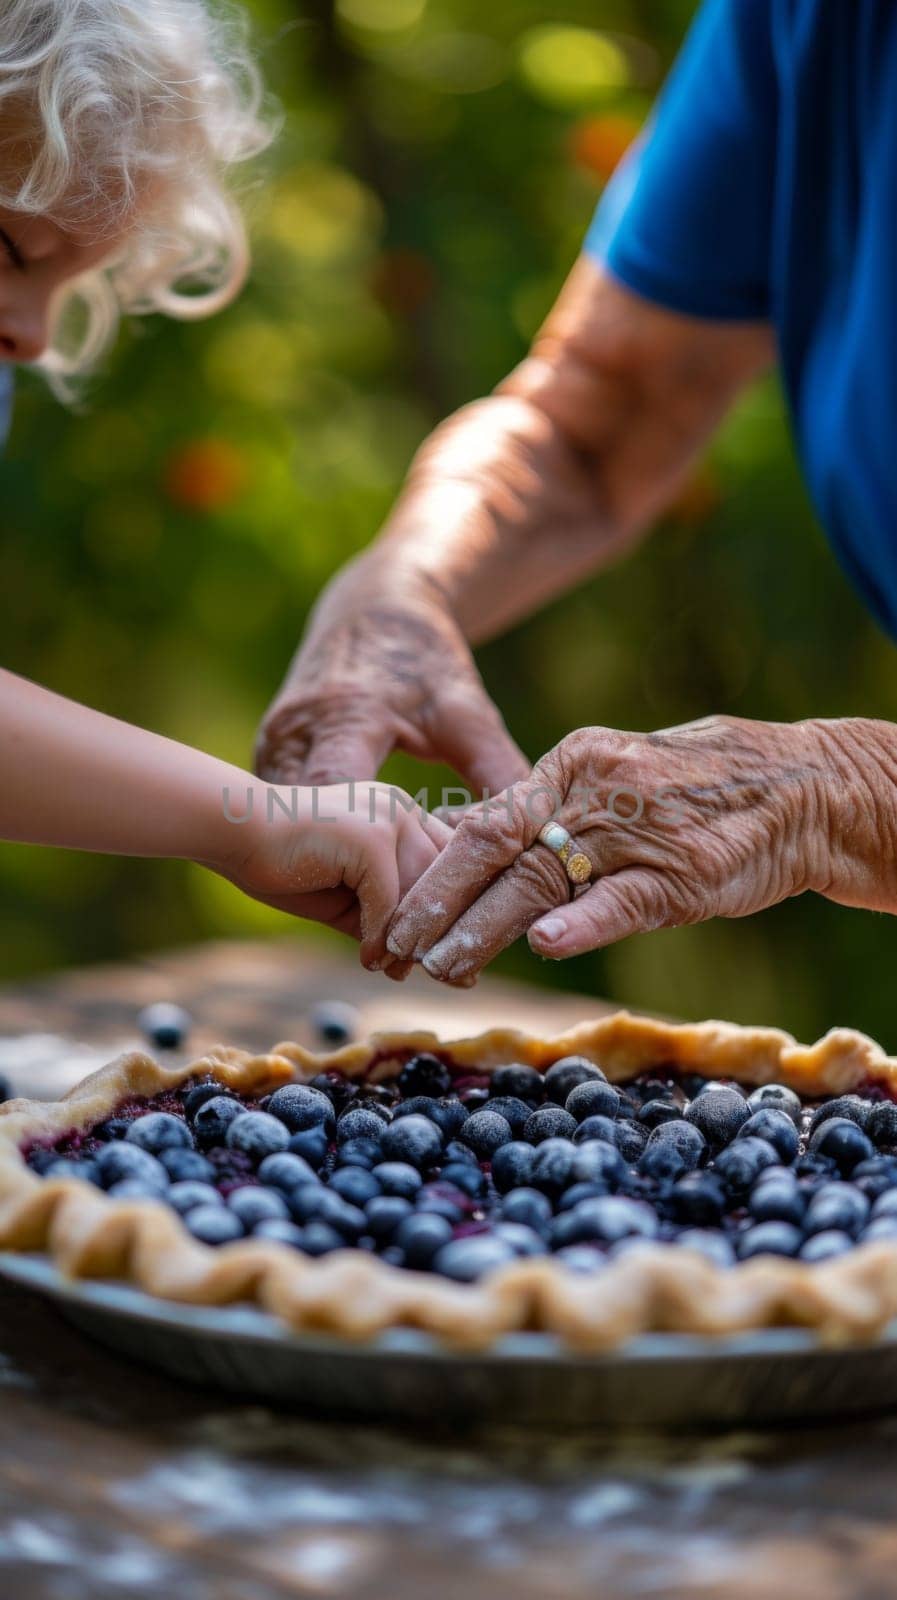 A person helping another to reach into a pie with blueberries, AI by starush